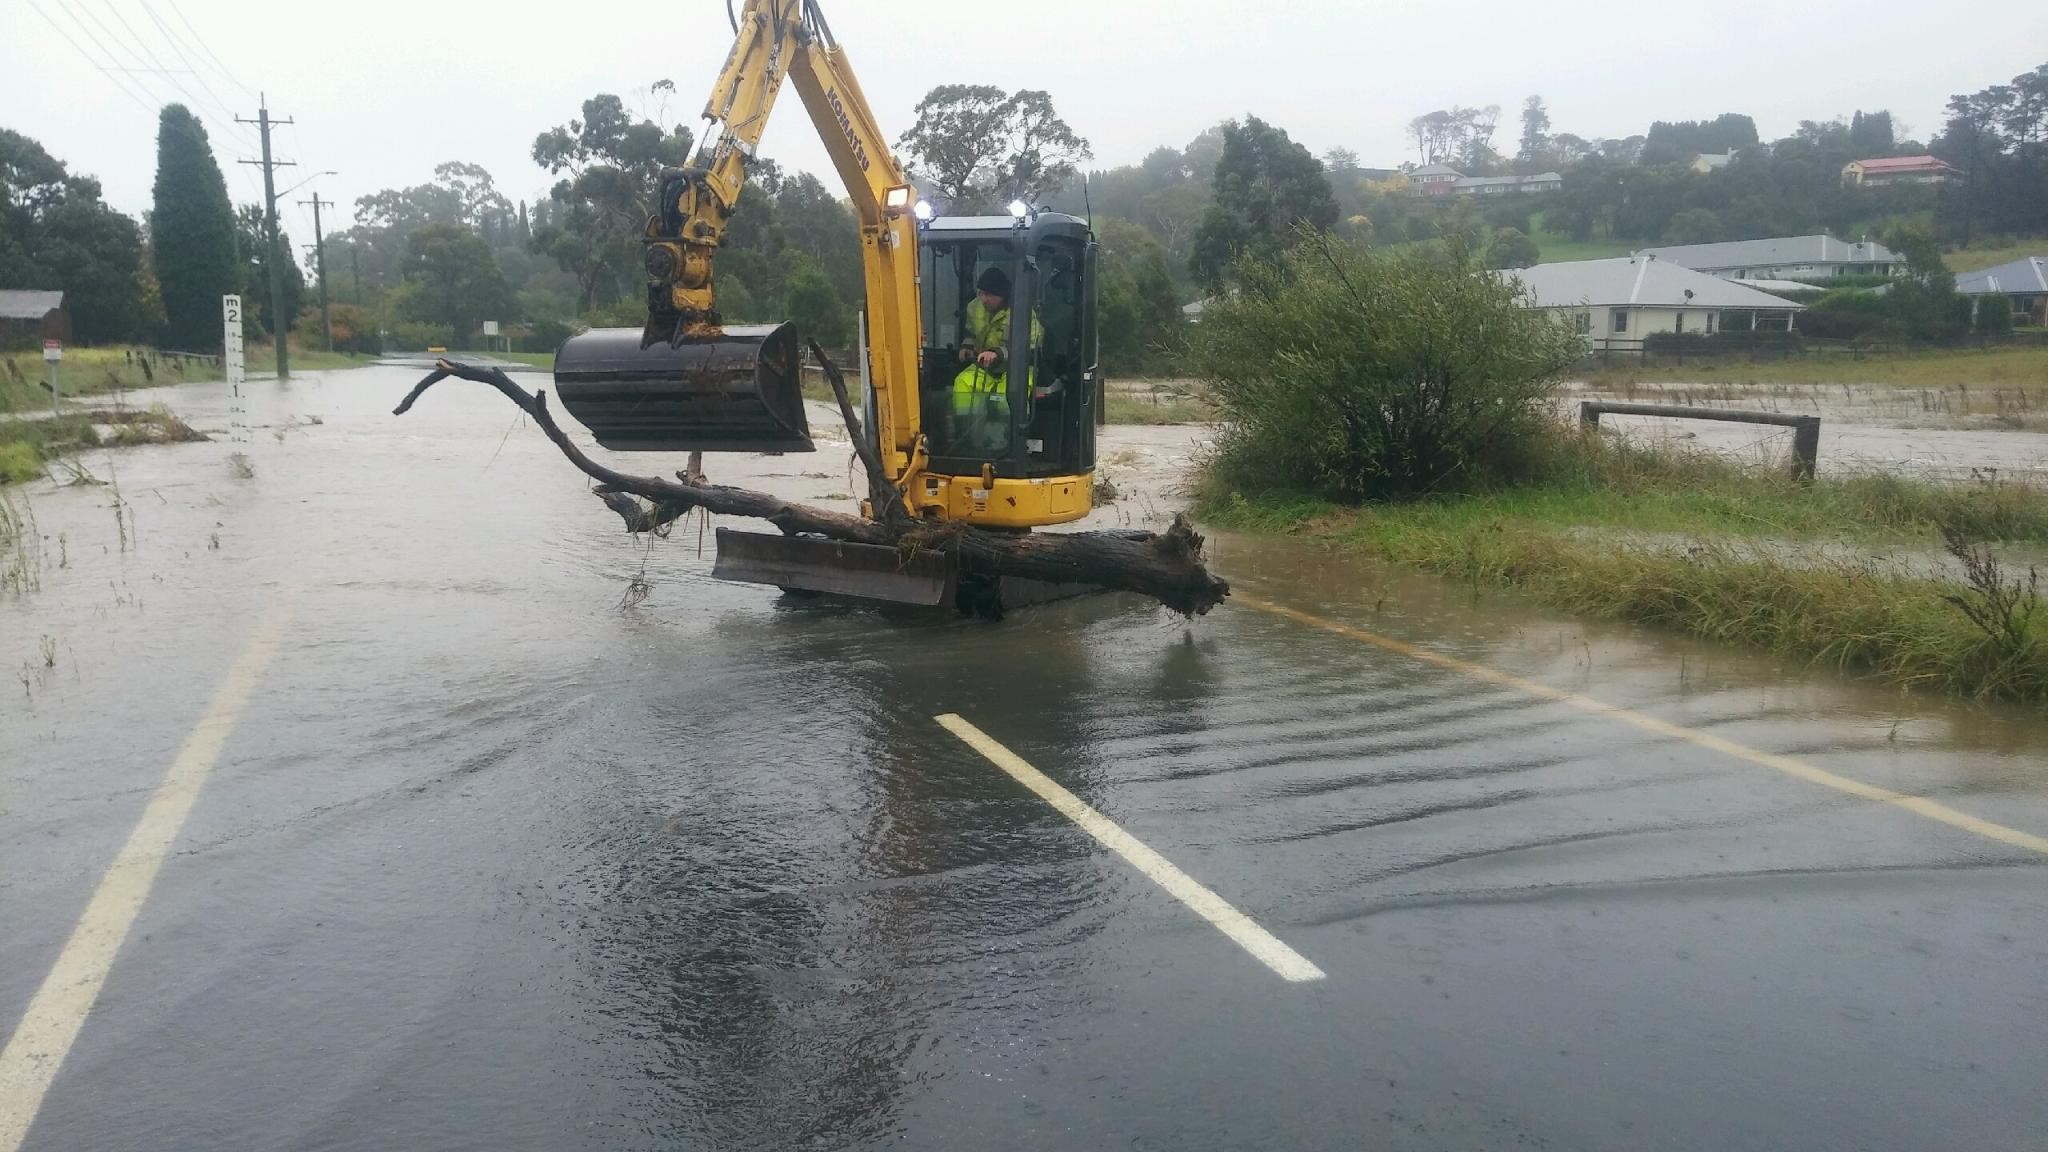 Machinery scooping up flood water